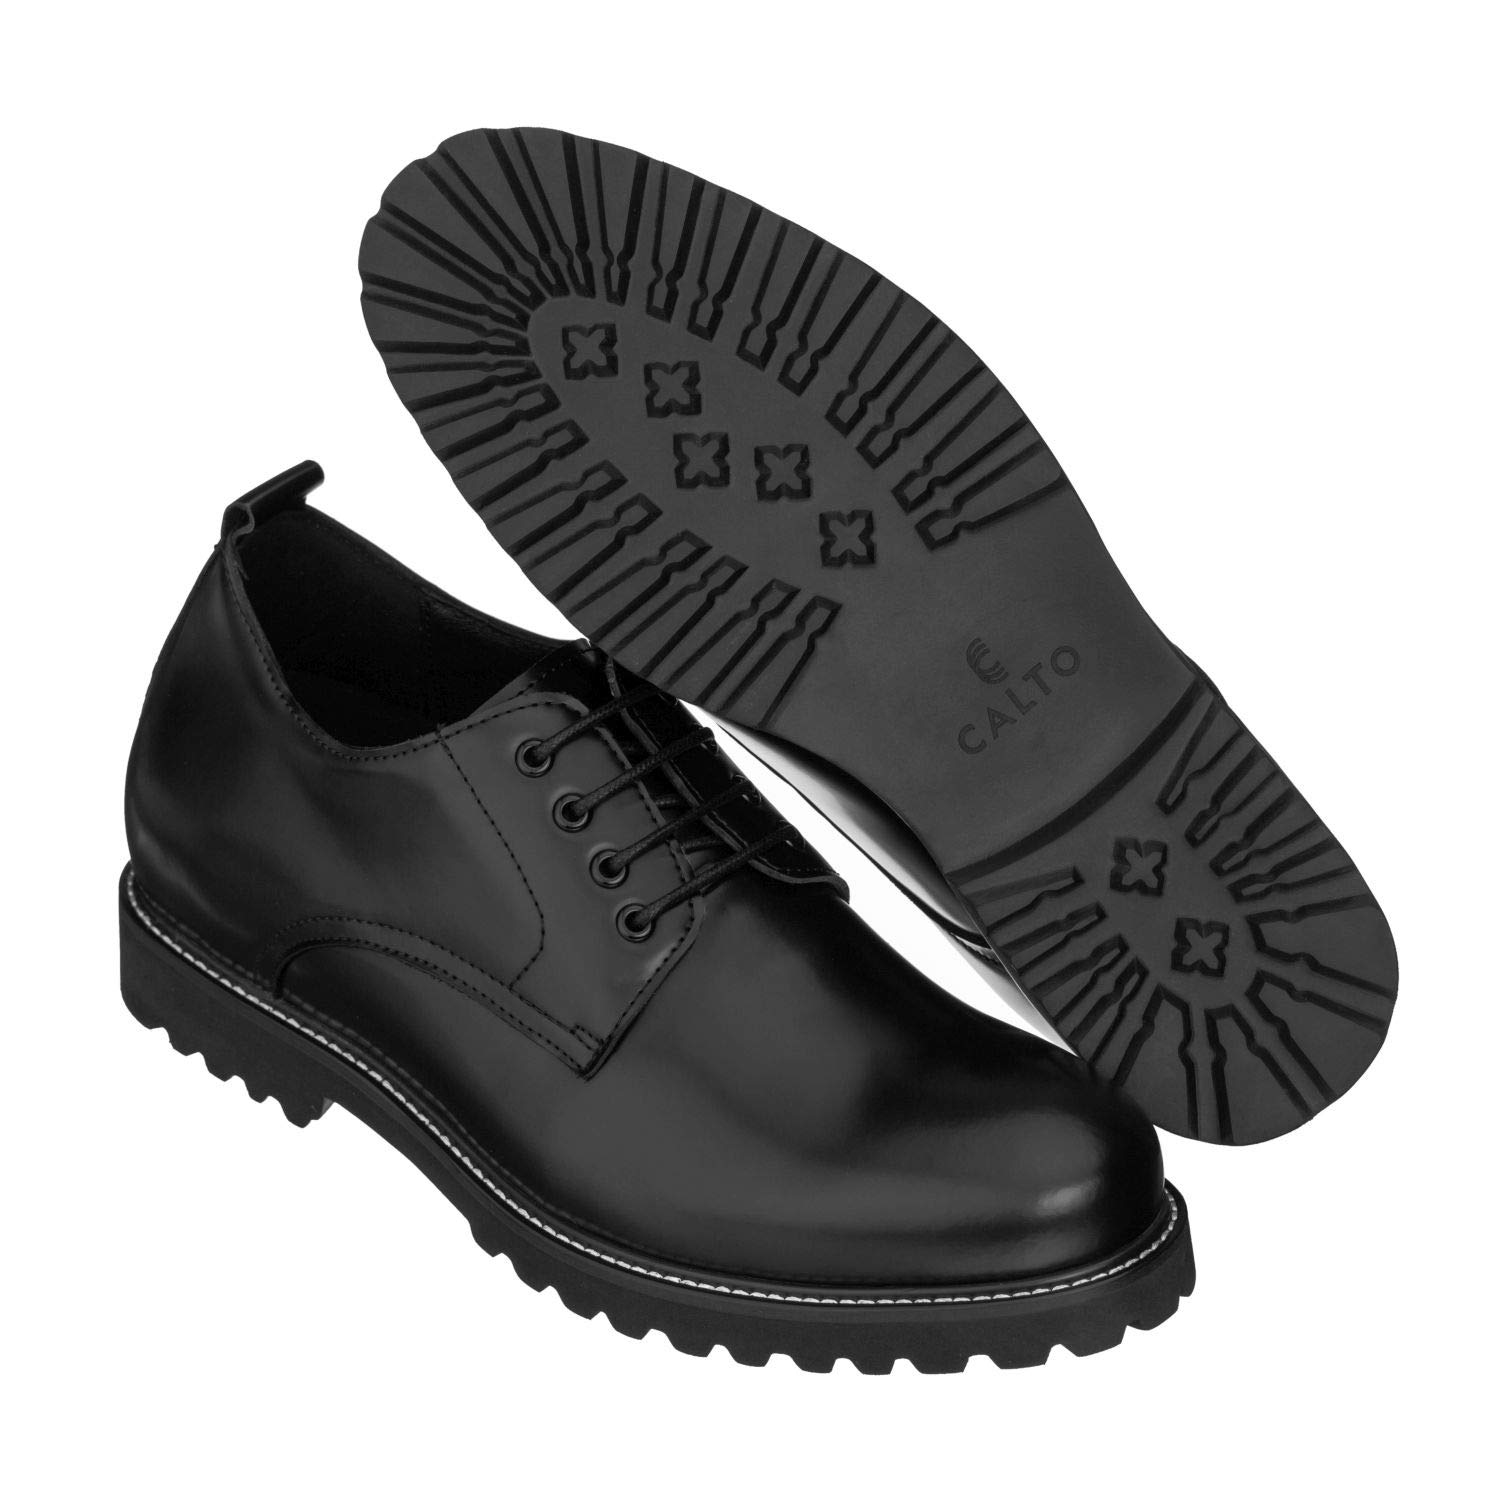 CALTO Men's Invisible Height Increasing Elevator Shoes - Black Leather Lace-up Low-top Work Boots - 3 Inches Taller - S9118